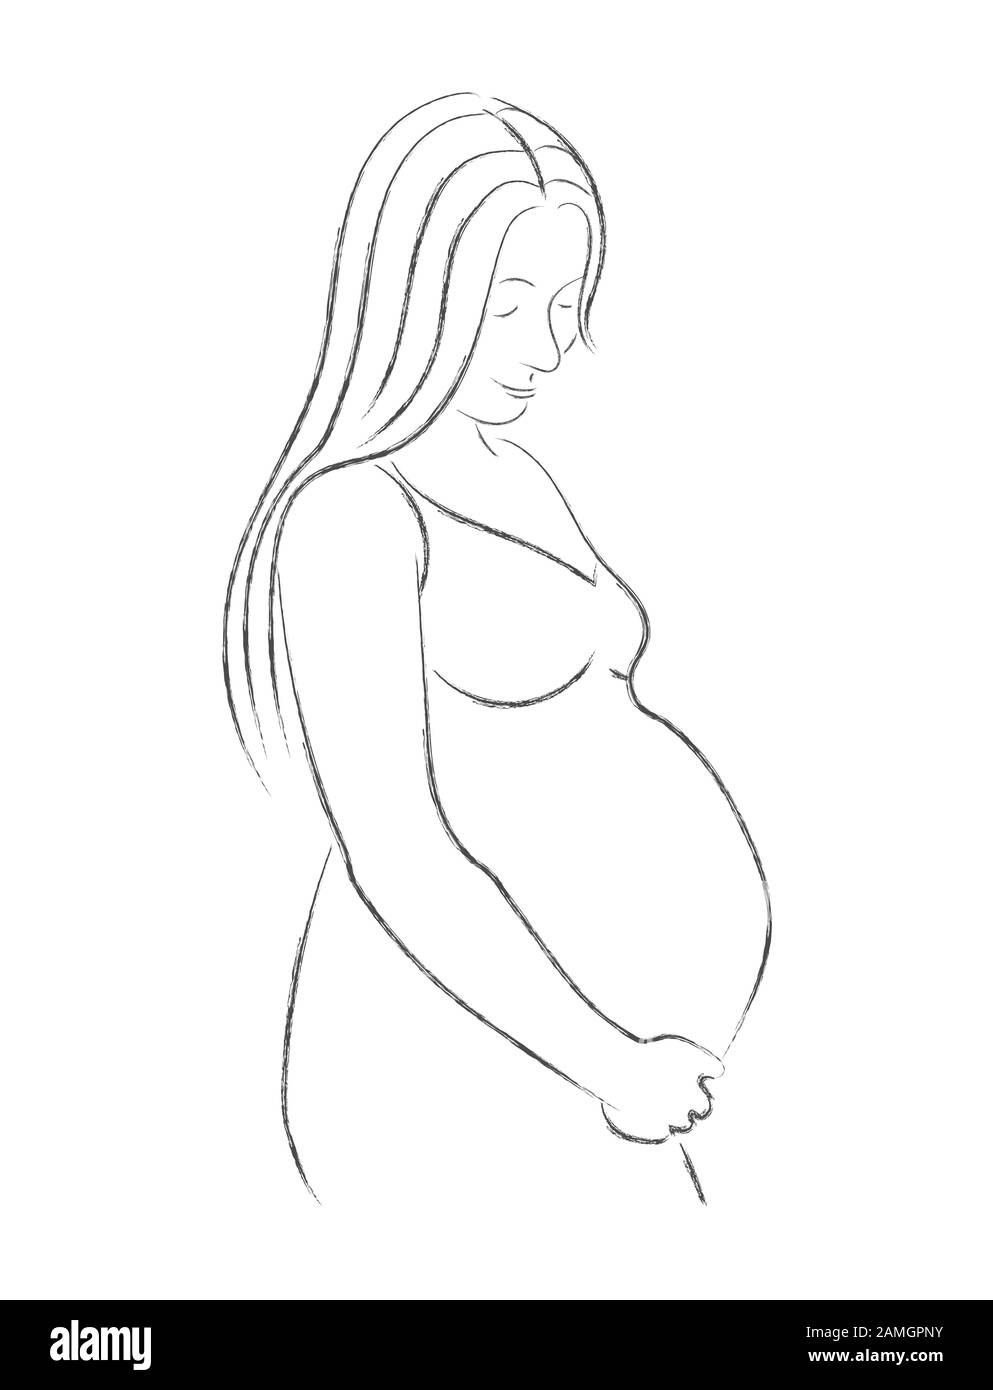 35,143 Pregnant Woman Silhouette Images, Stock Photos, 3D objects, &  Vectors | Shutterstock